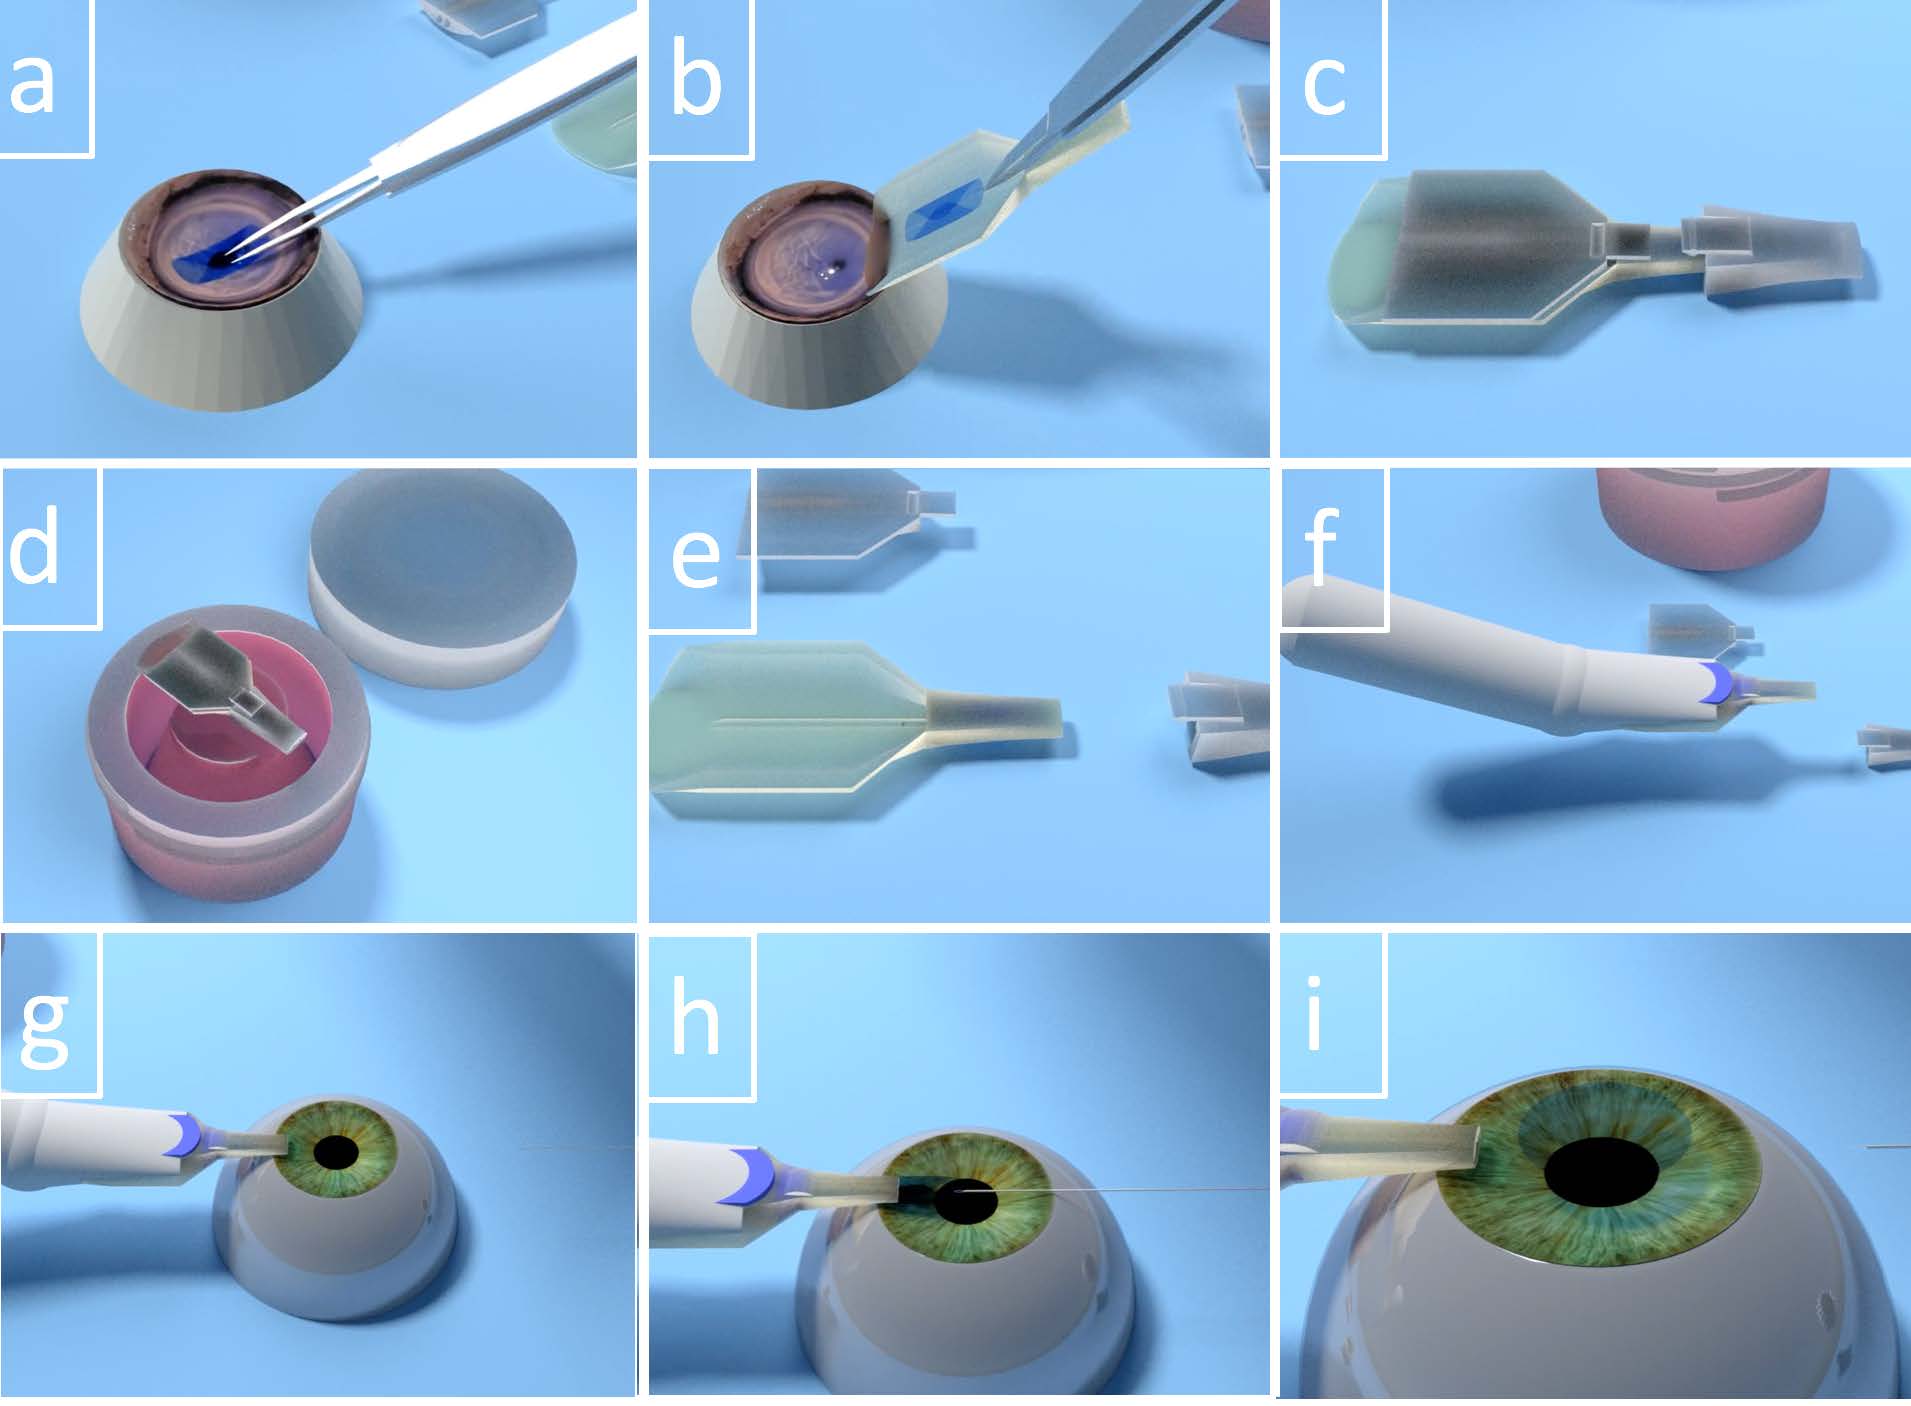 The image shows an illustration of the cornea being folded, placed in the Treyetech device, and loaded into an eye in 9 steps.